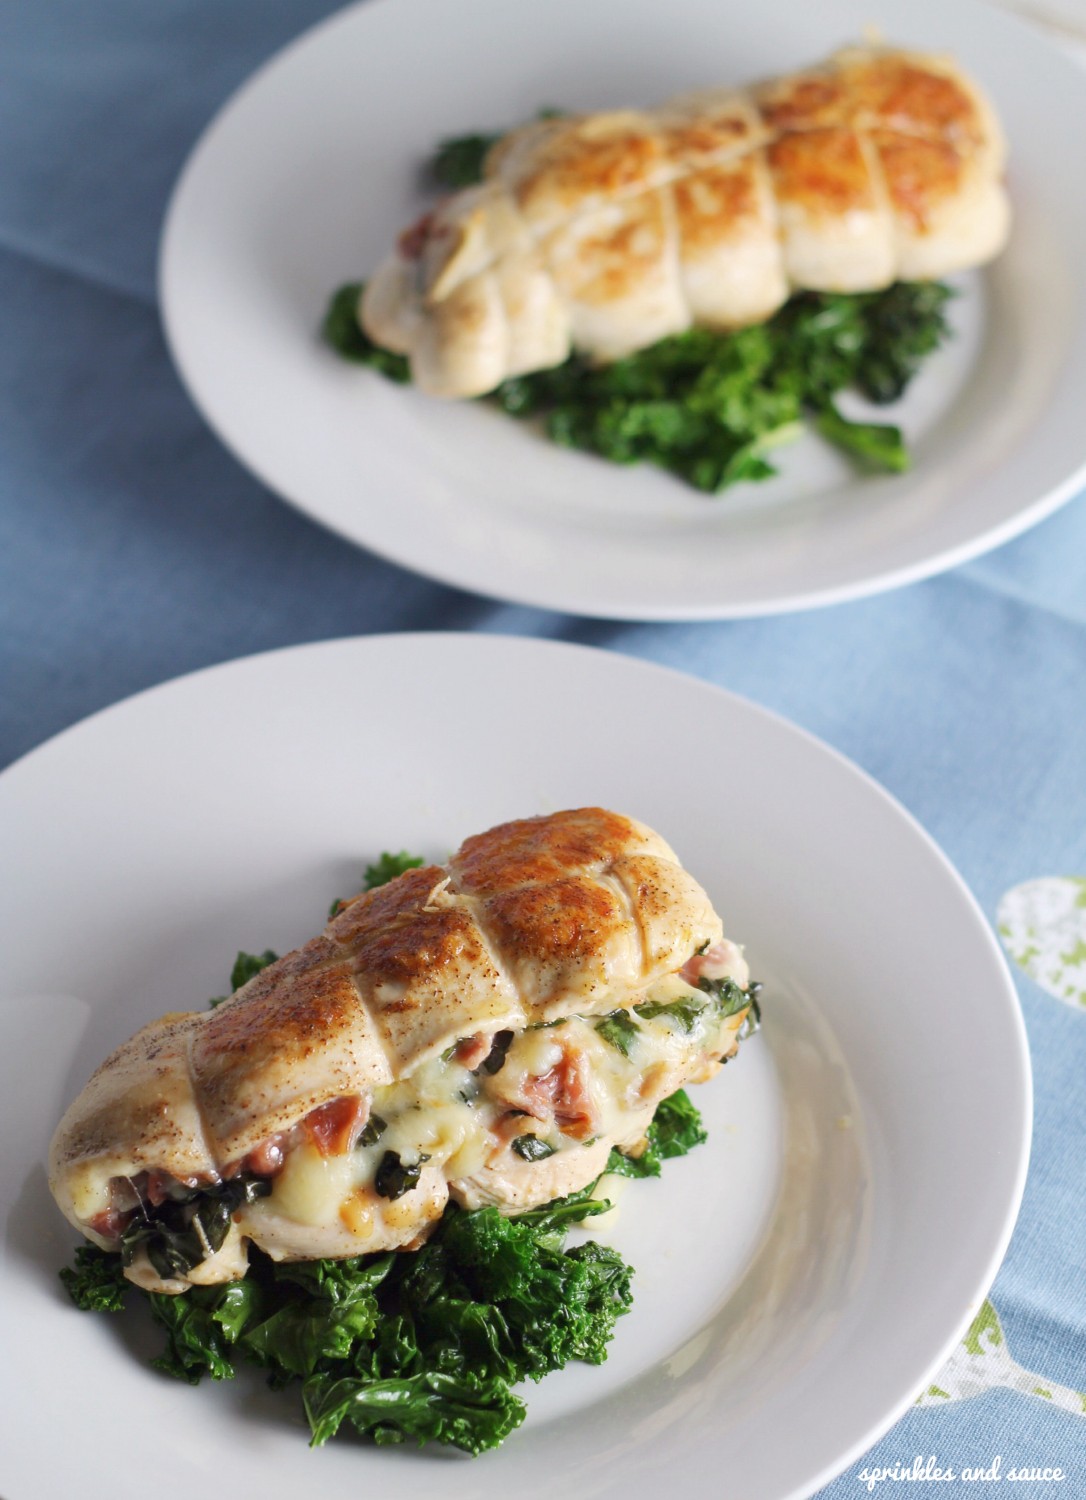 Stuffed Chicken with Proscuitto, Mozzarella and Basil